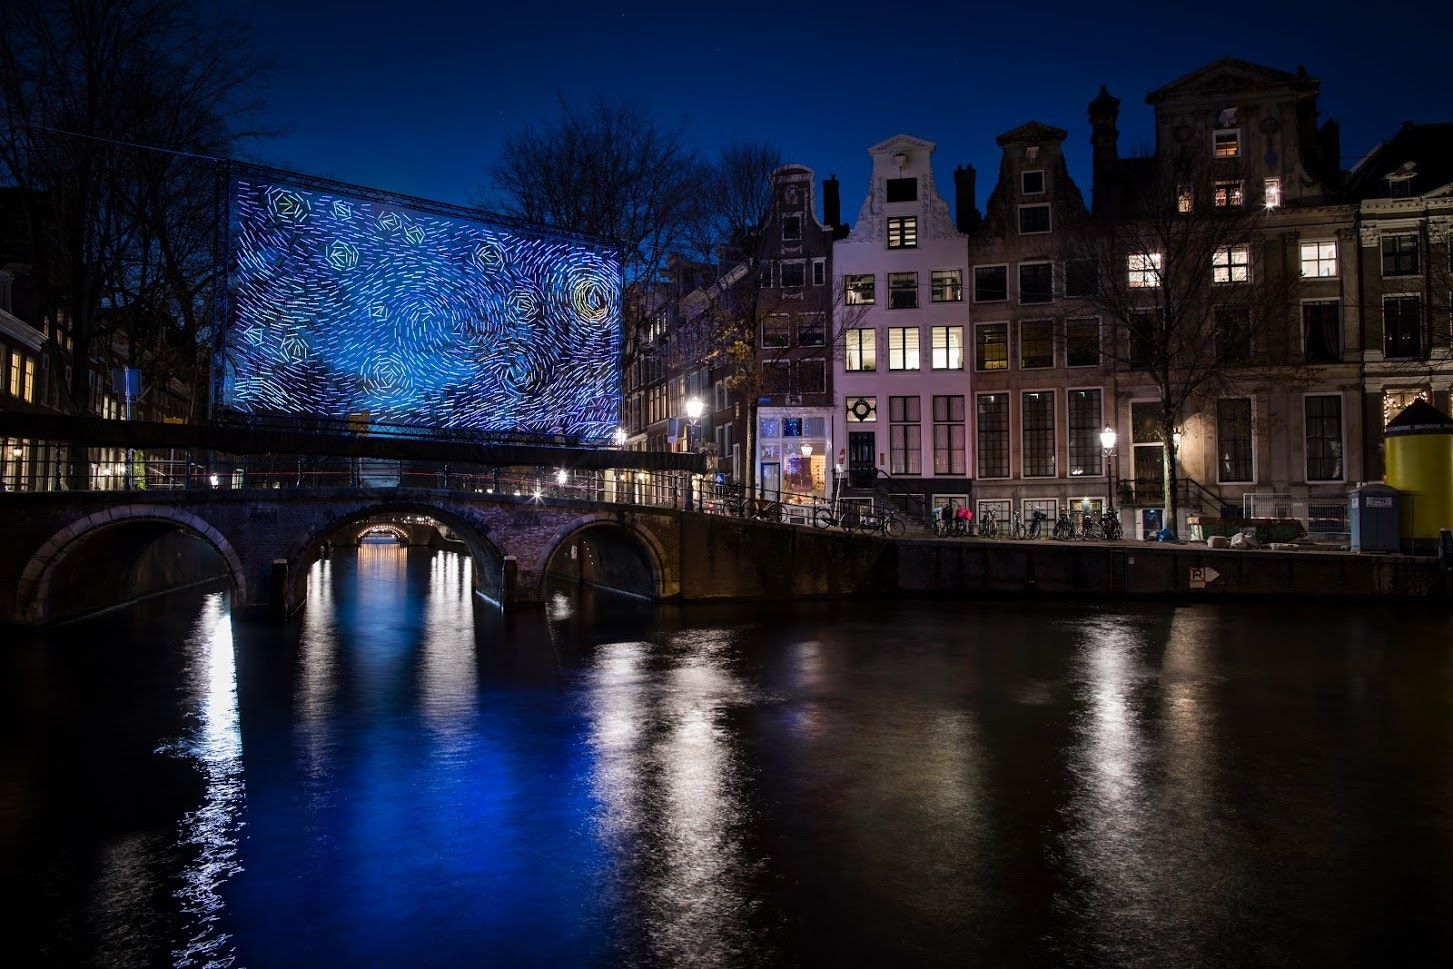 Travel News - Van Gogh’s Starry Night comes to life in Amsterdam